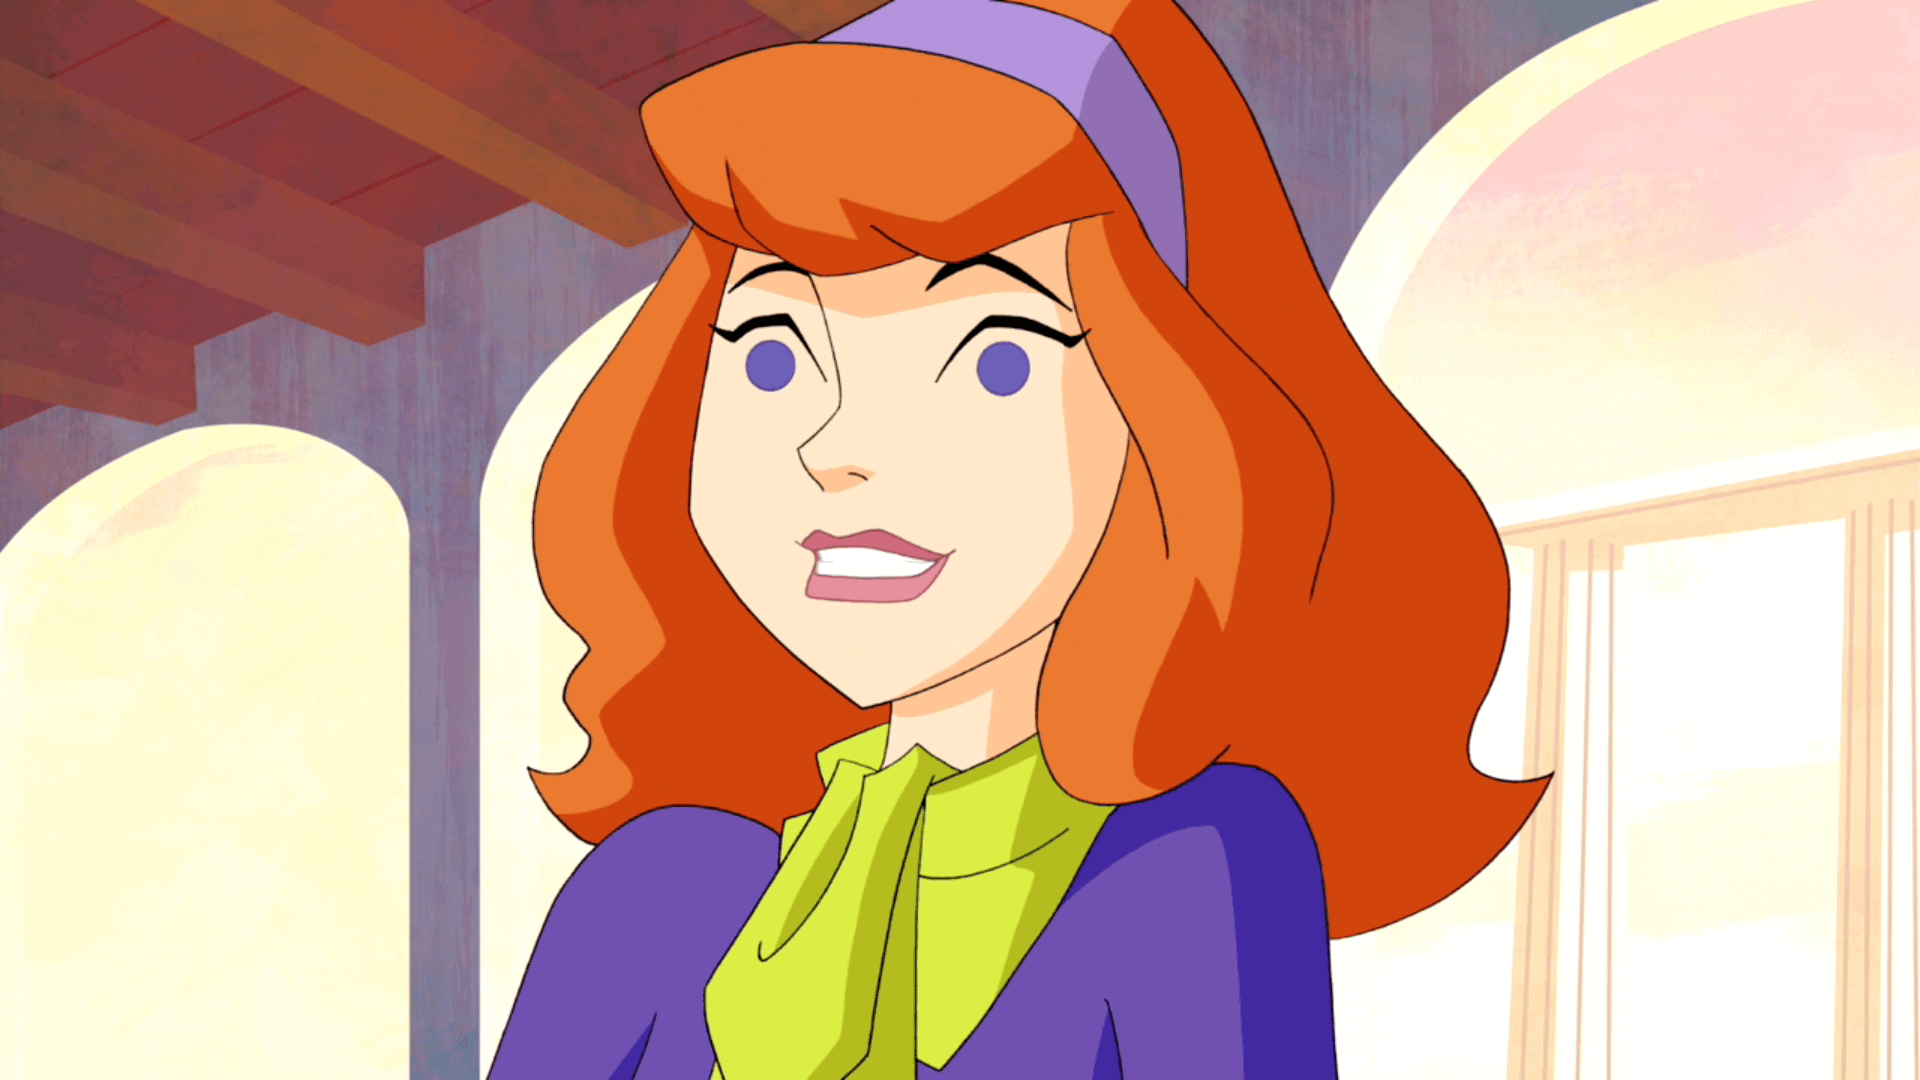 Scooby-Doo: Main & Supporting Characters | LovelyCharacters.com